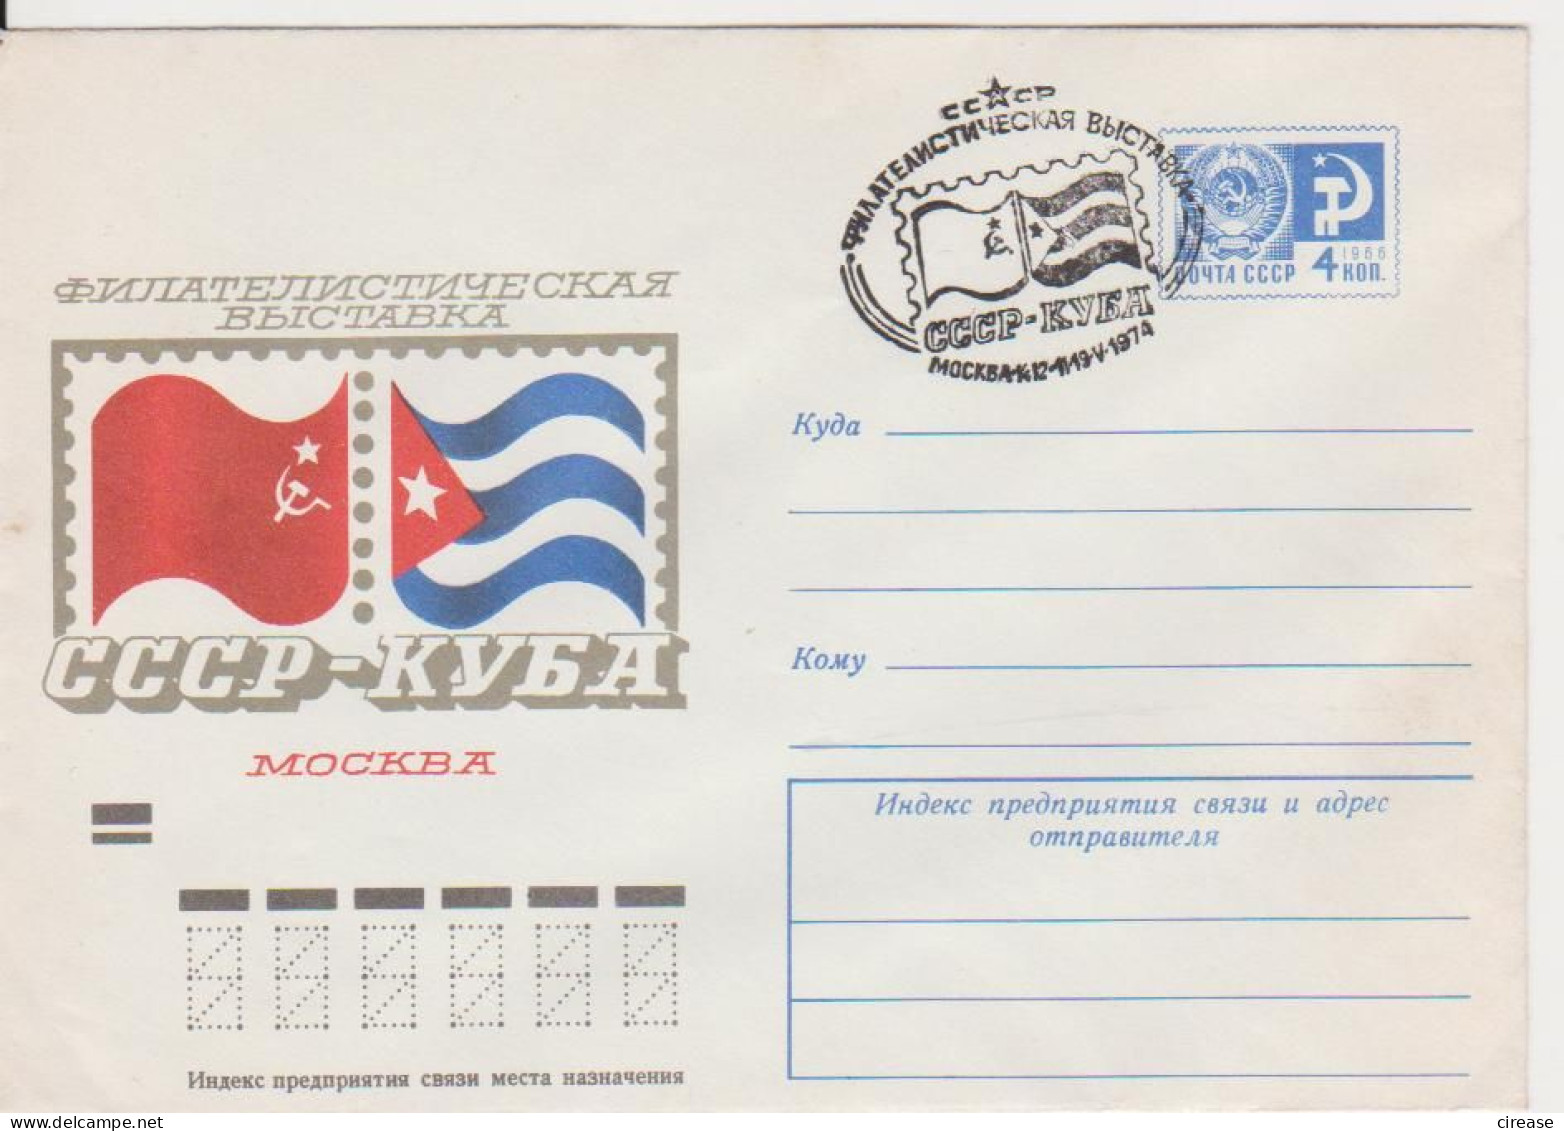 FLAGS. RUSSIAN CUBA FRIENDSHIP RUSSIA CCCP URSS POSTAL STATIONERY - Covers